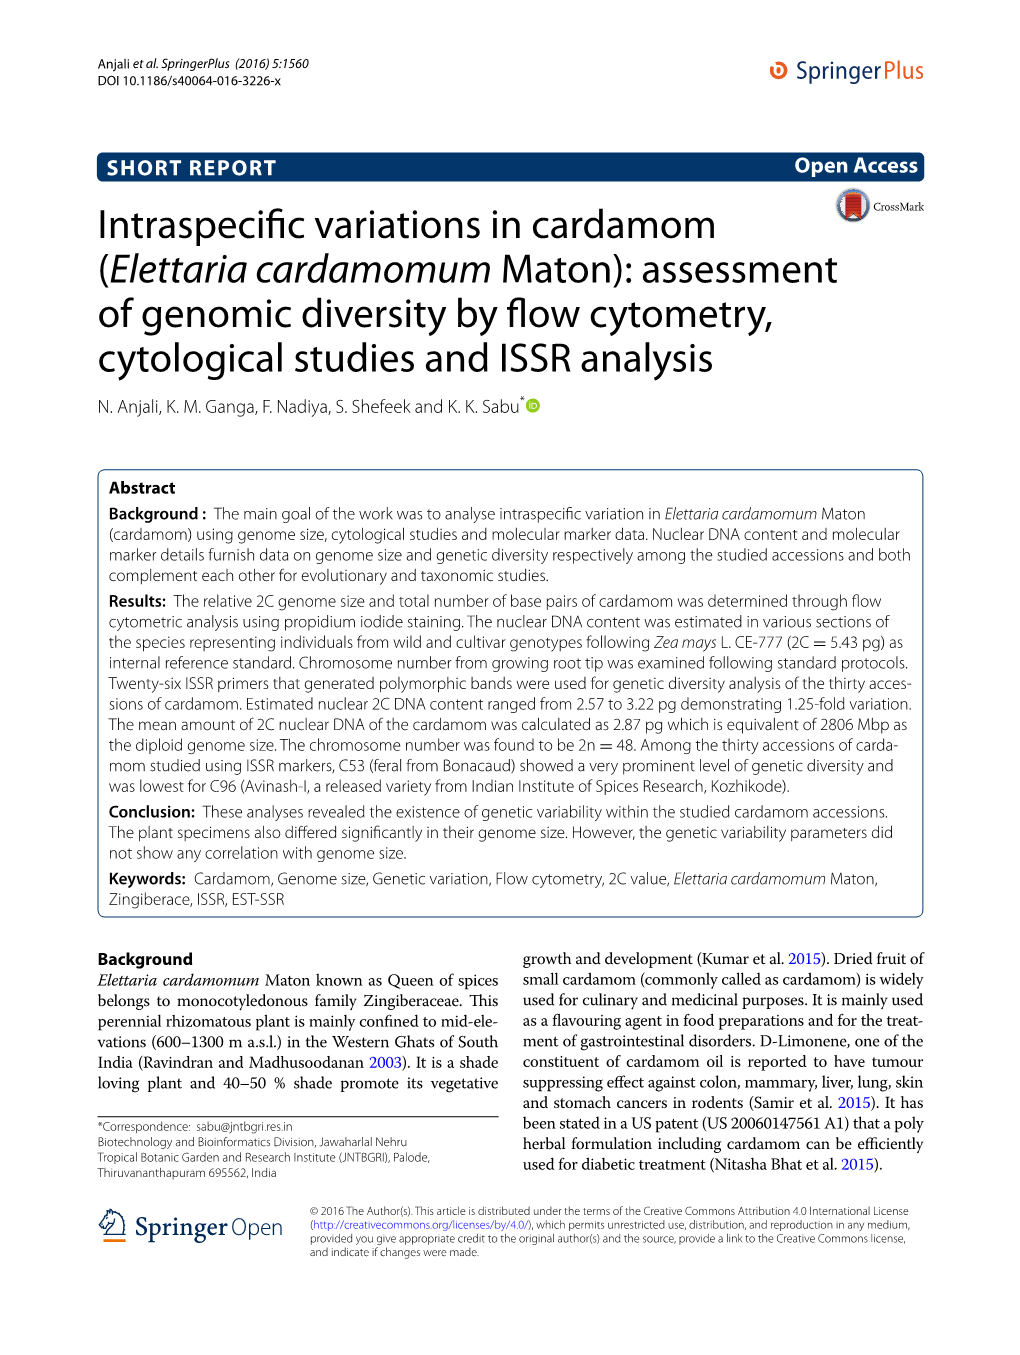 Intraspecific Variations in Cardamom (Elettaria Cardamomum Maton): Assessment of Genomic Diversity by Flow Cytometry, Cytological Studies and ISSR Analysis N